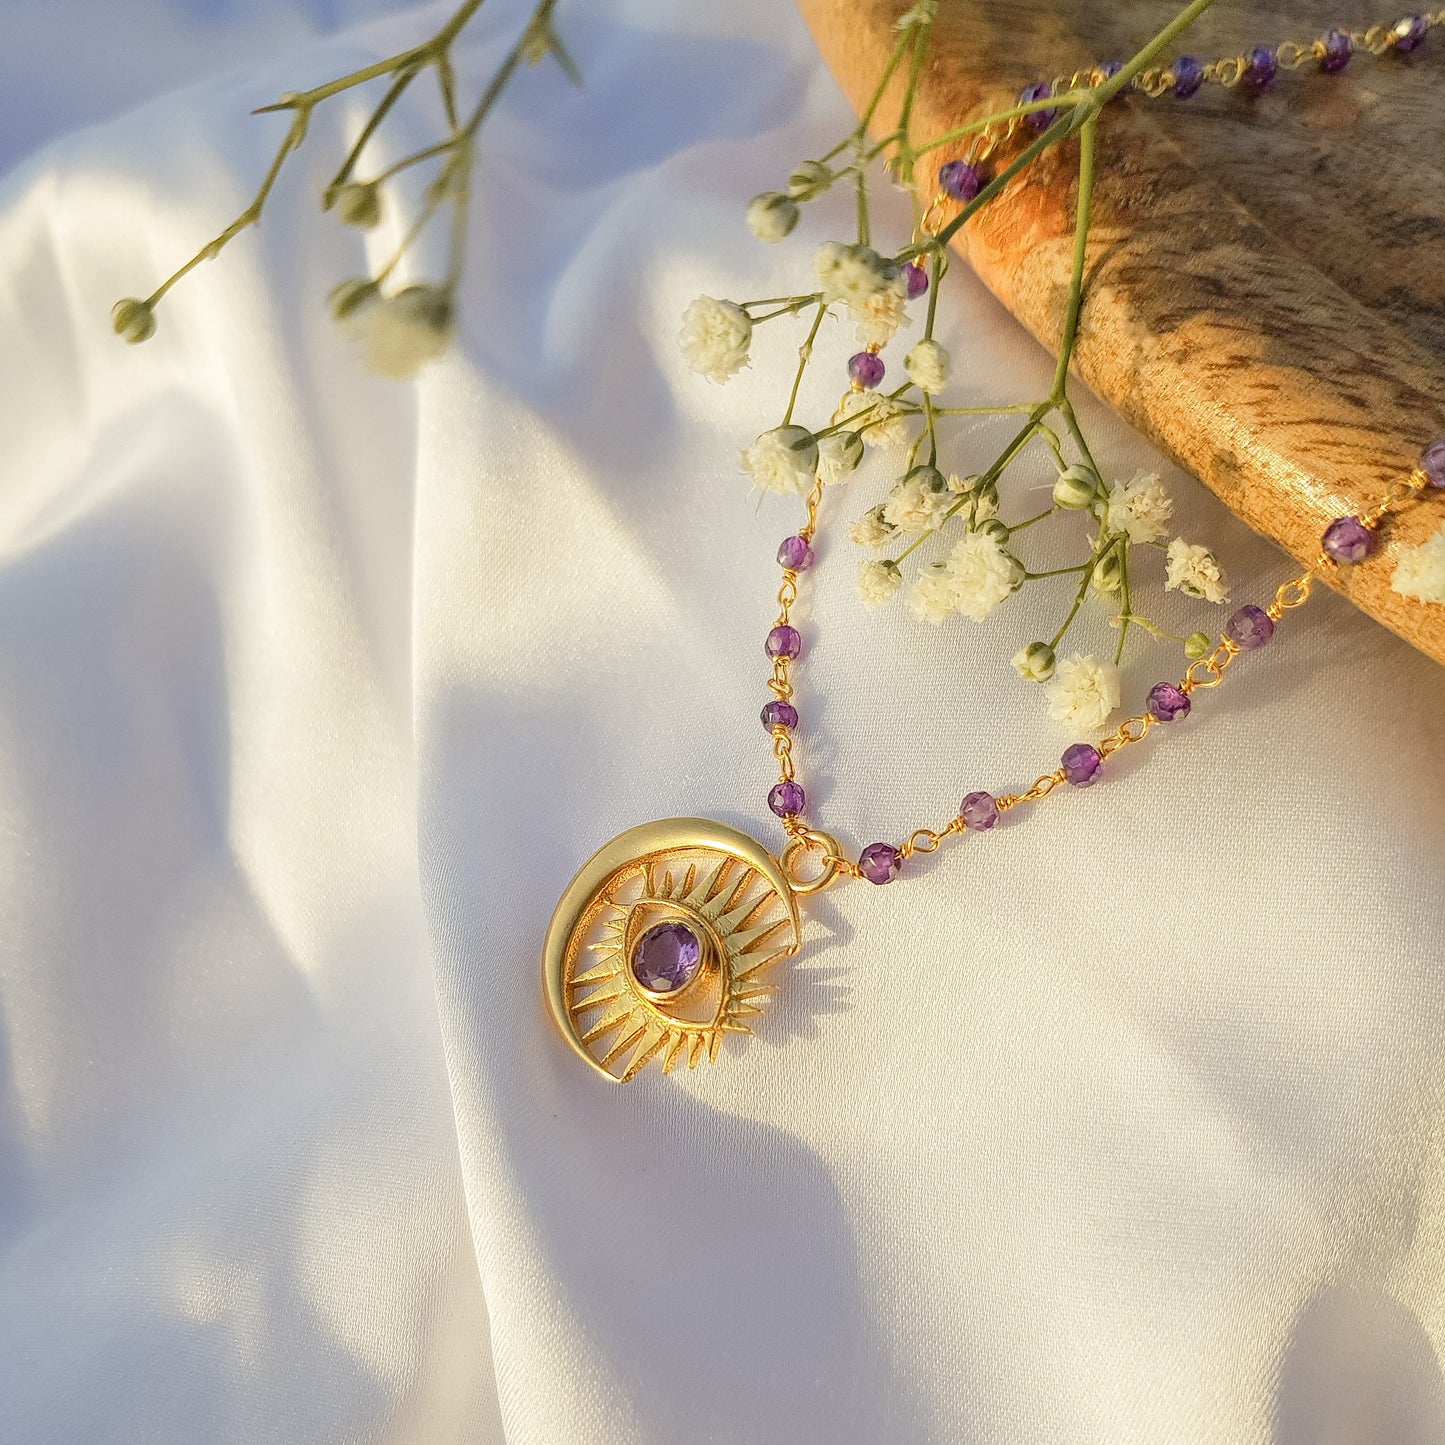 Amethyst beaded necklace with Evil Eye Crescent Moon charm in 22k gold plated 925 sterling silver